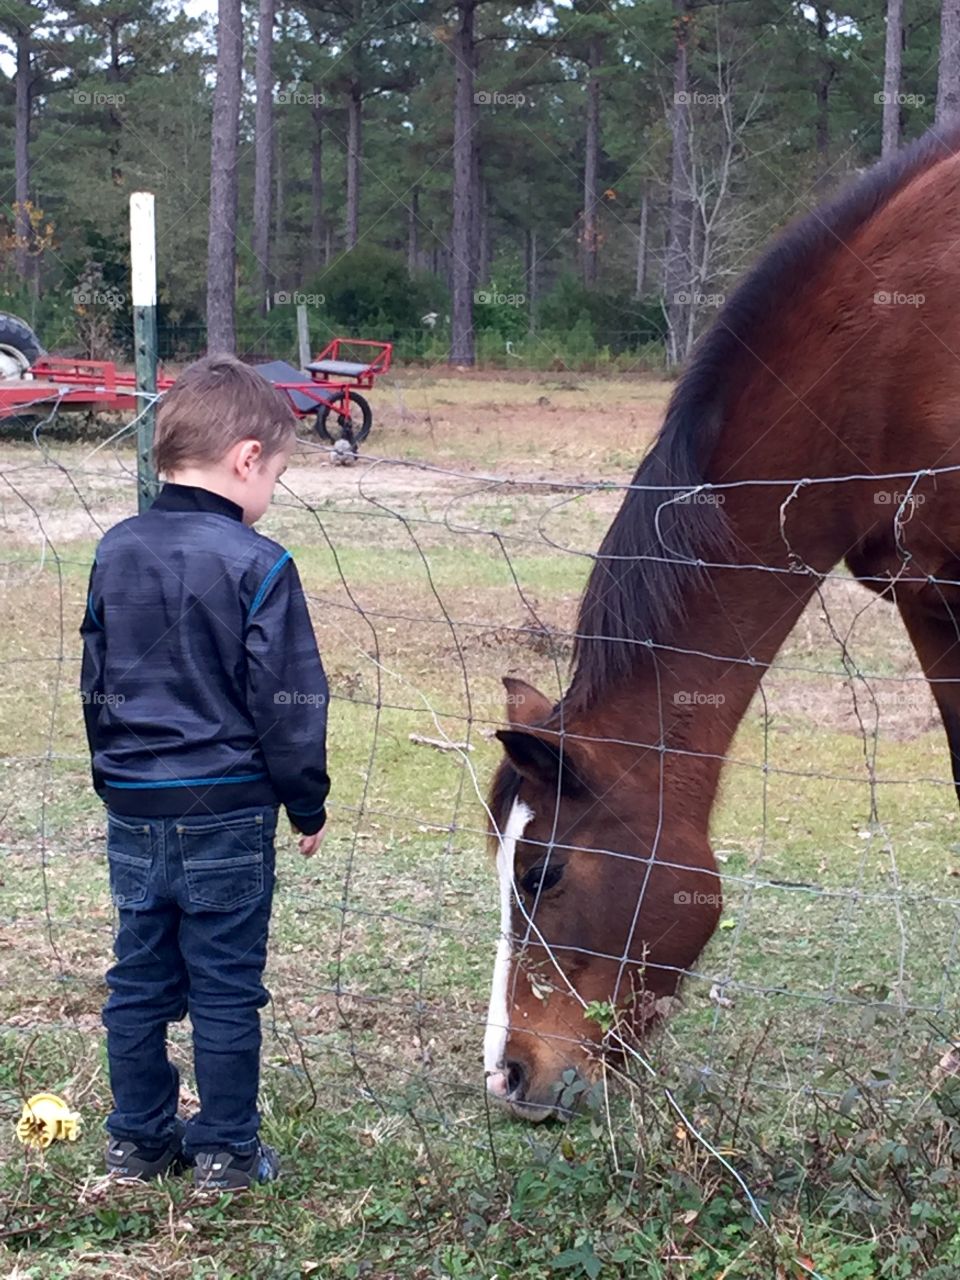 A boy and a horse <3